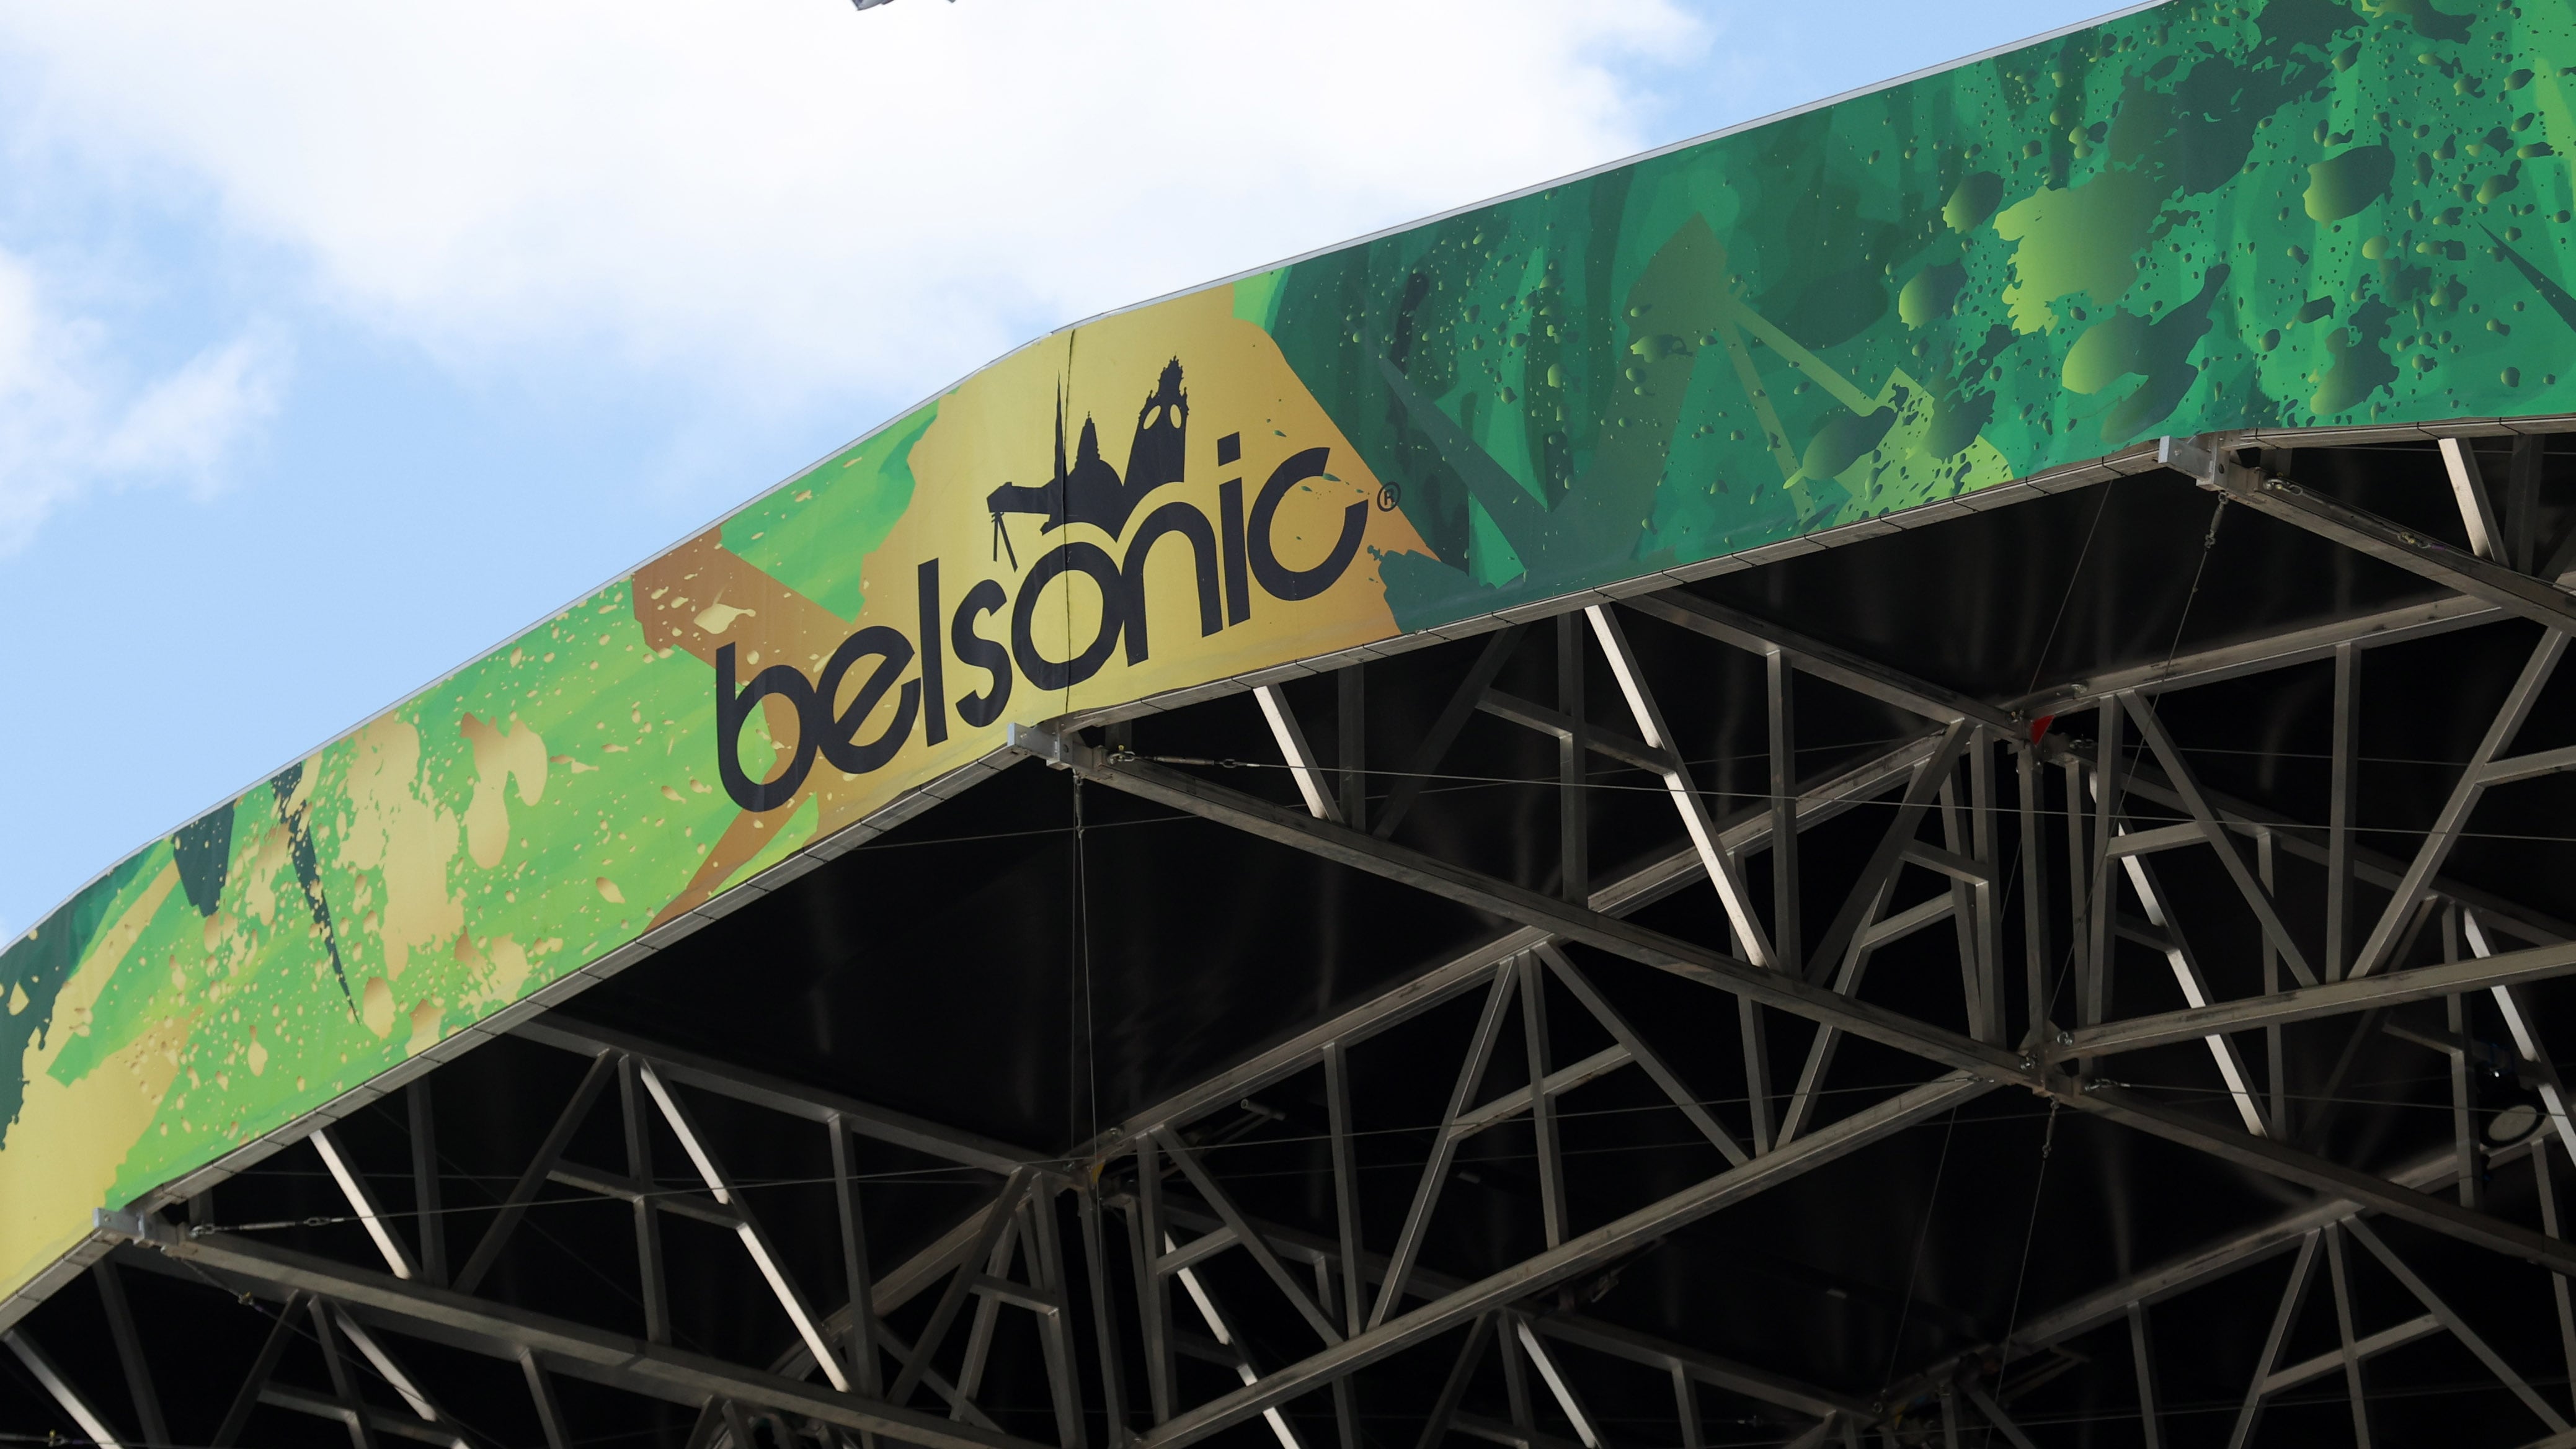 Final preparations get underway ahead of Belsonic 2024 from Friday the 7th of June at Ormeau Park in Belfast.
This year's line-up includes Derek Ryan, Picture This, Limp Bizkit, Becky Hill, Sting, Blondie, Take That and Shania Twain.
PICTURE COLM LENAGHAN